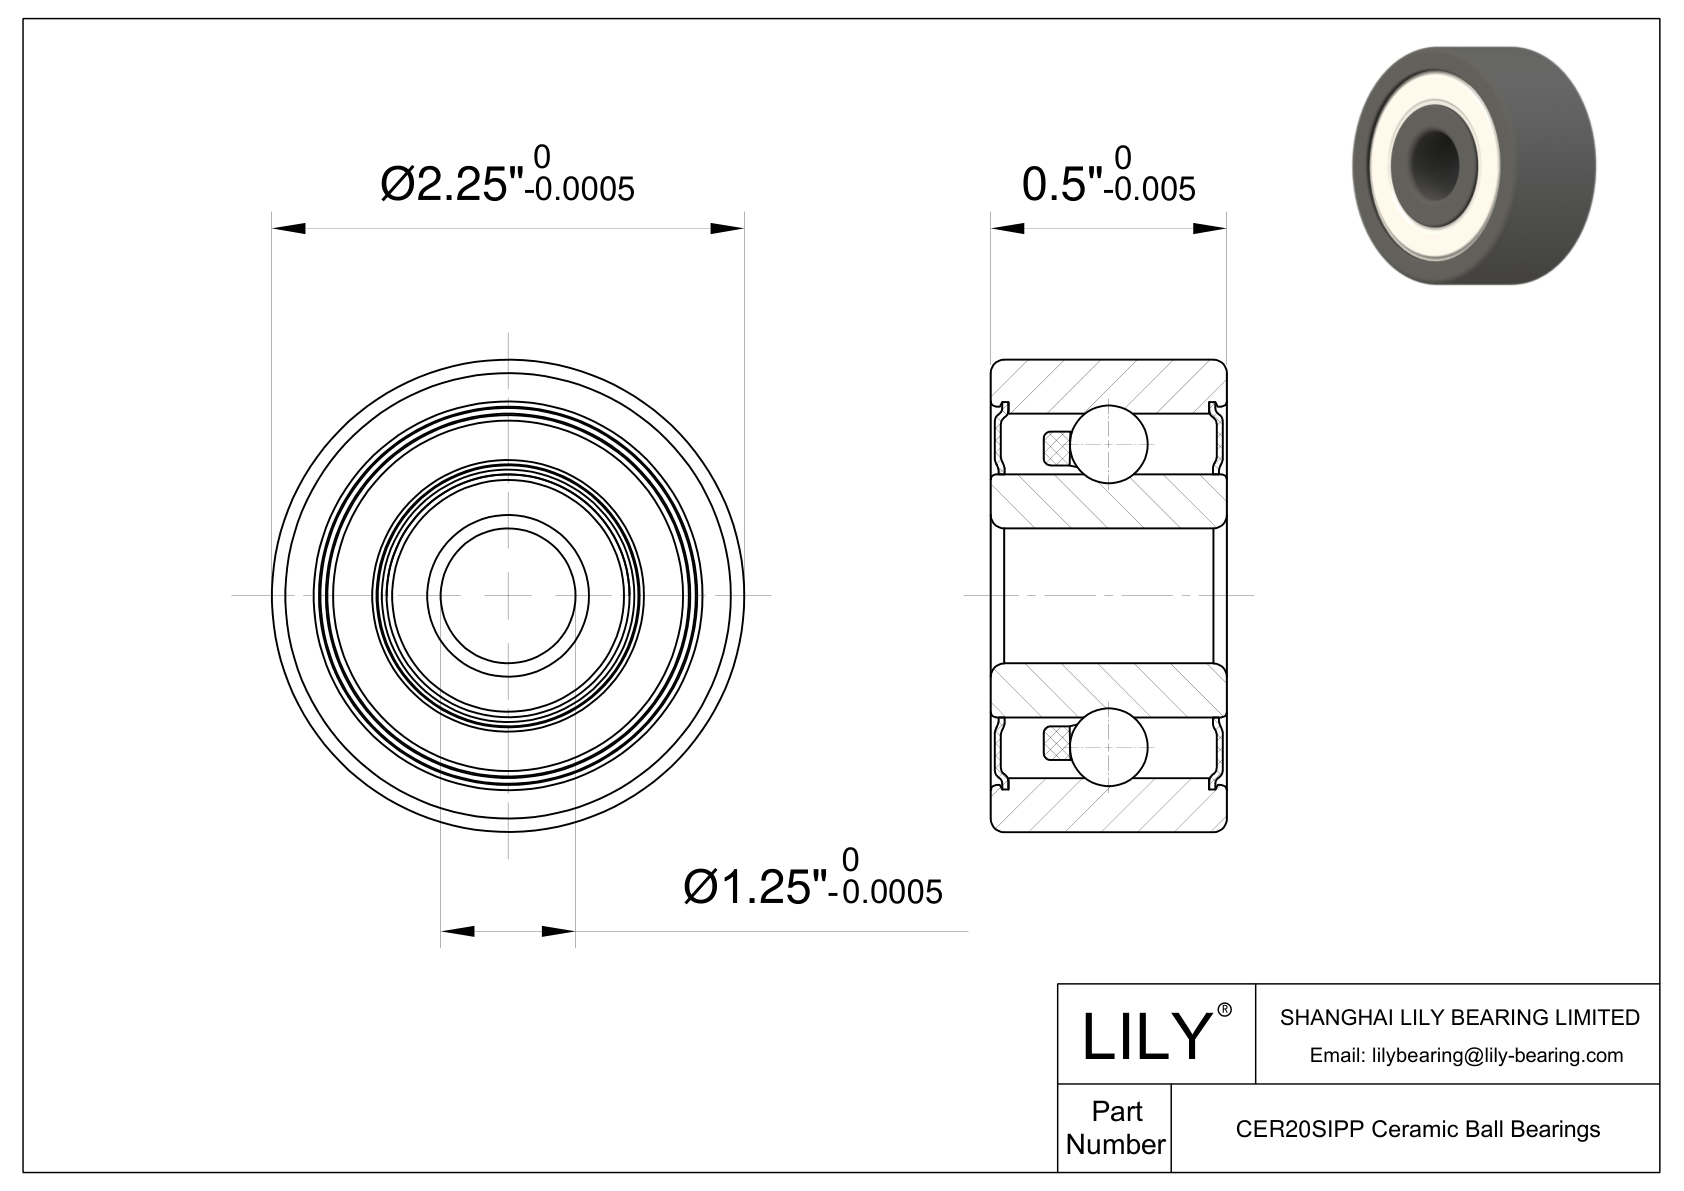 CESI R20 2RS Inch Size Silicon Nitride Ceramic Bearings cad drawing